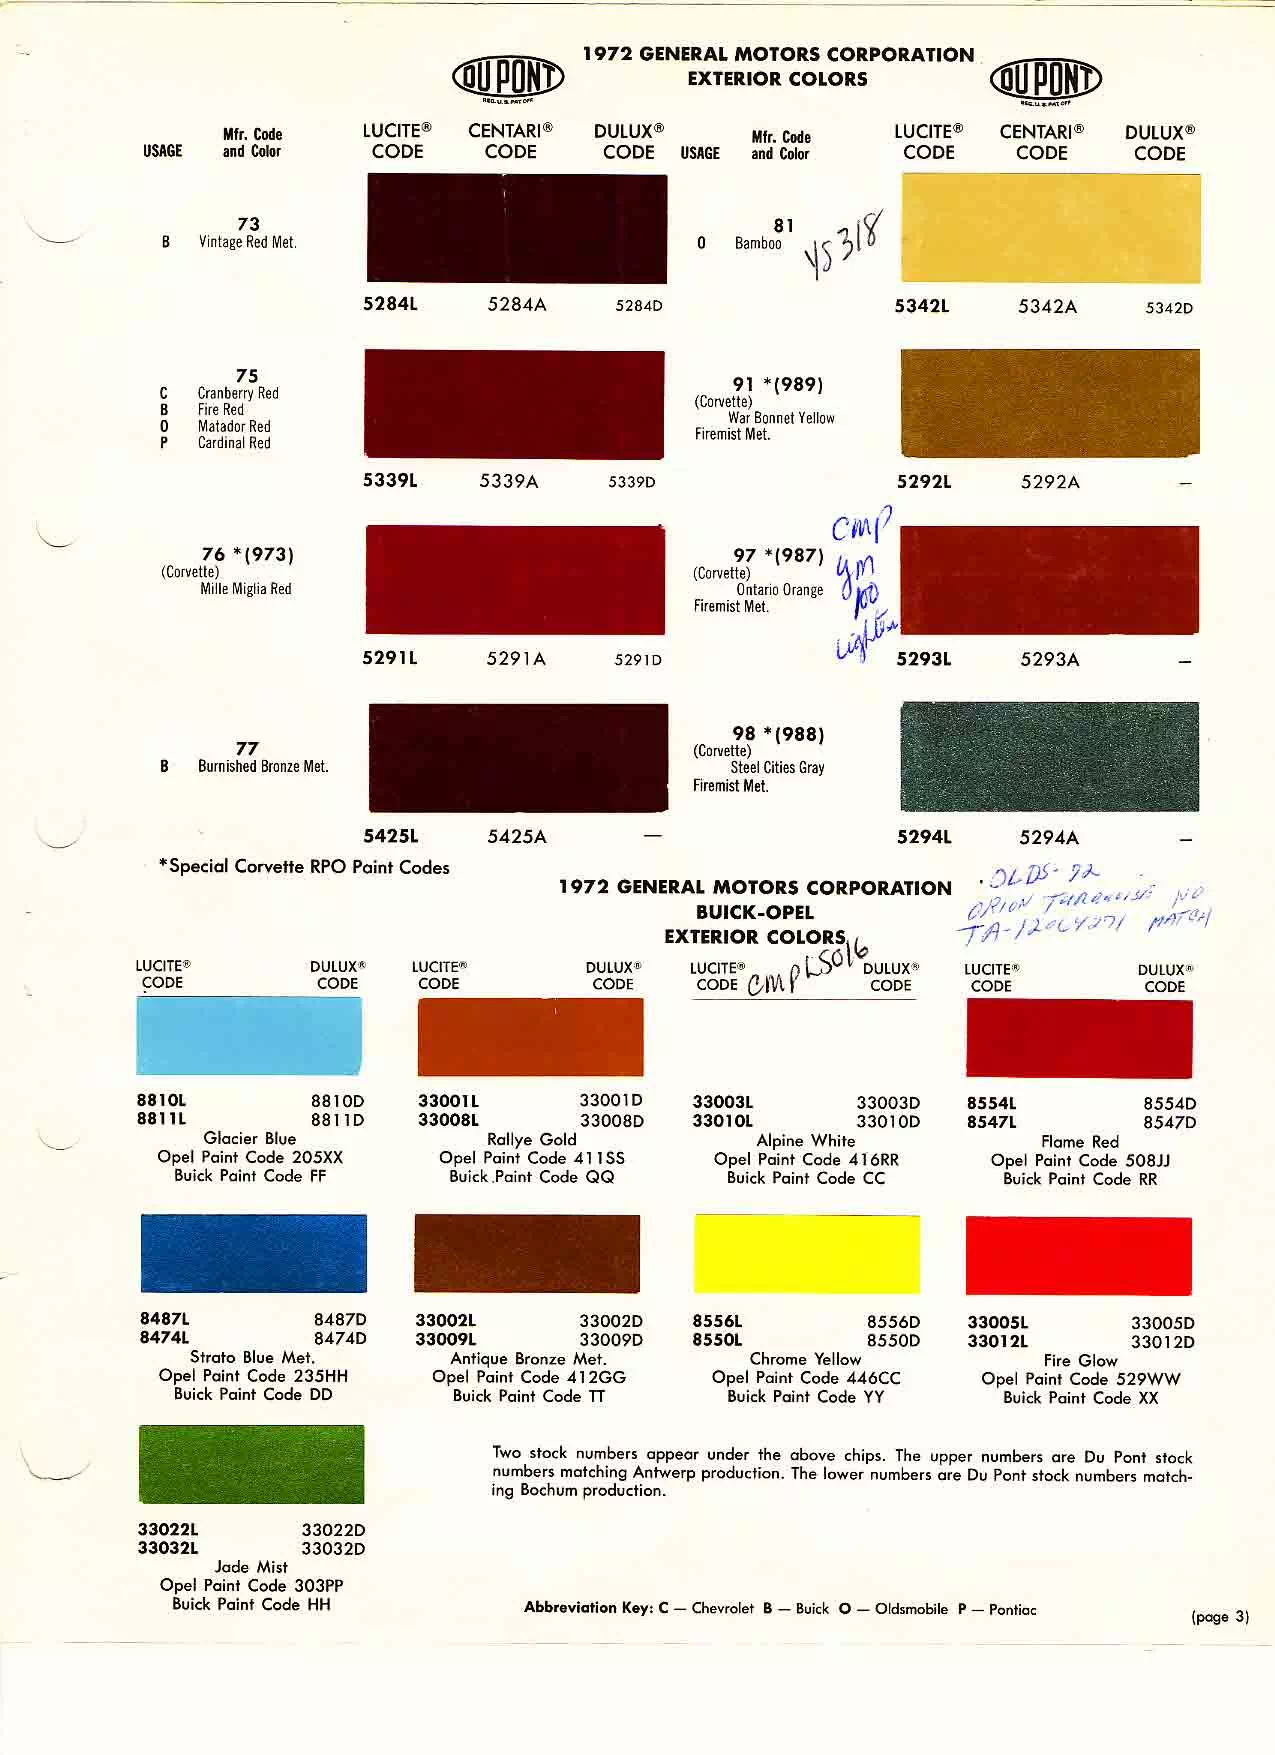 Colors, Descriptions, Codes, and Paint Swatches for General Motors Vehicles in 1972